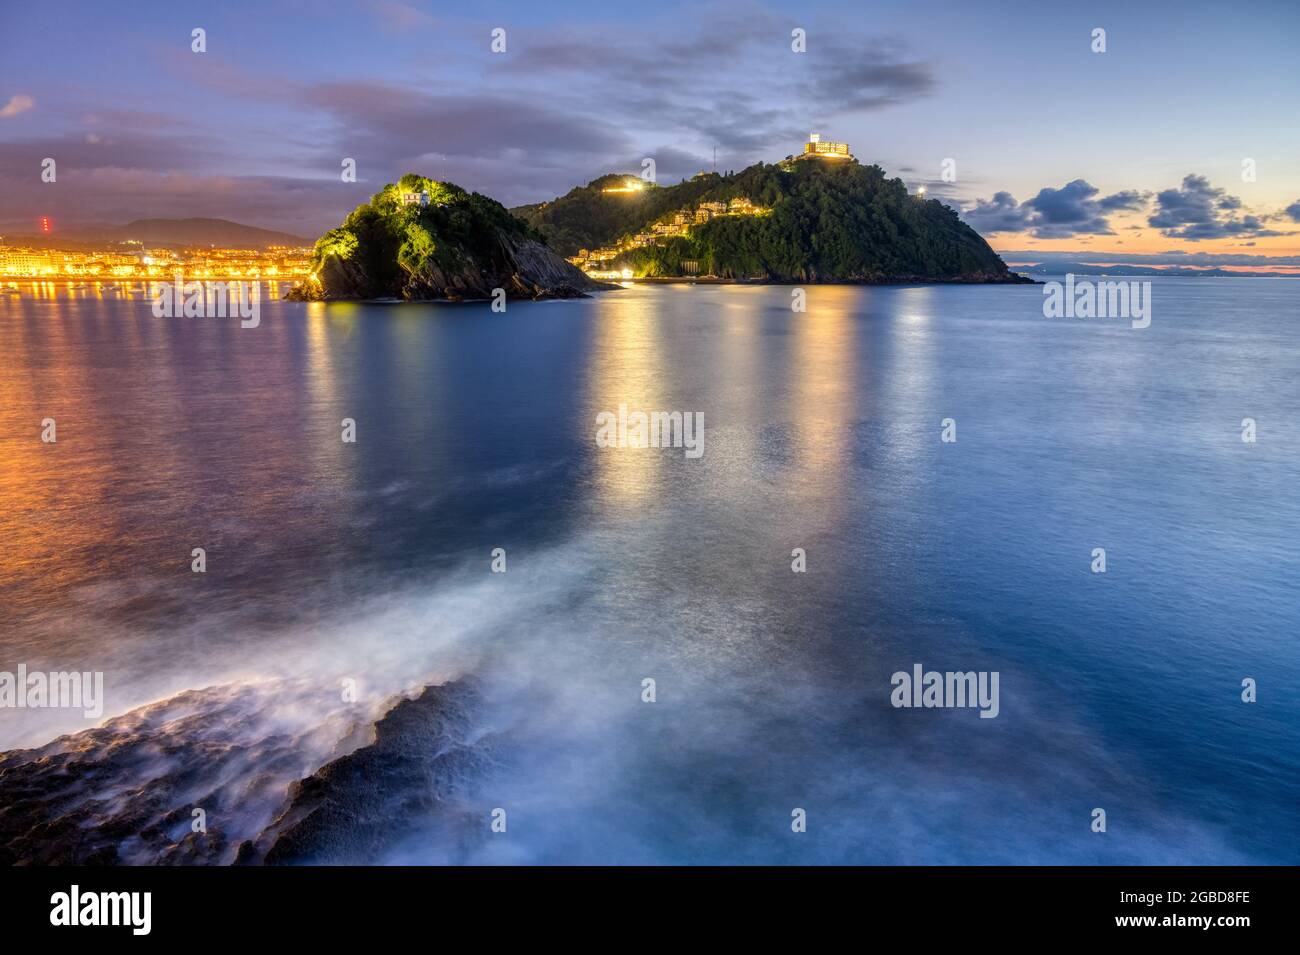 The bay of San Sebastian in Spain with Monte Igueldo after sunset Stock Photo